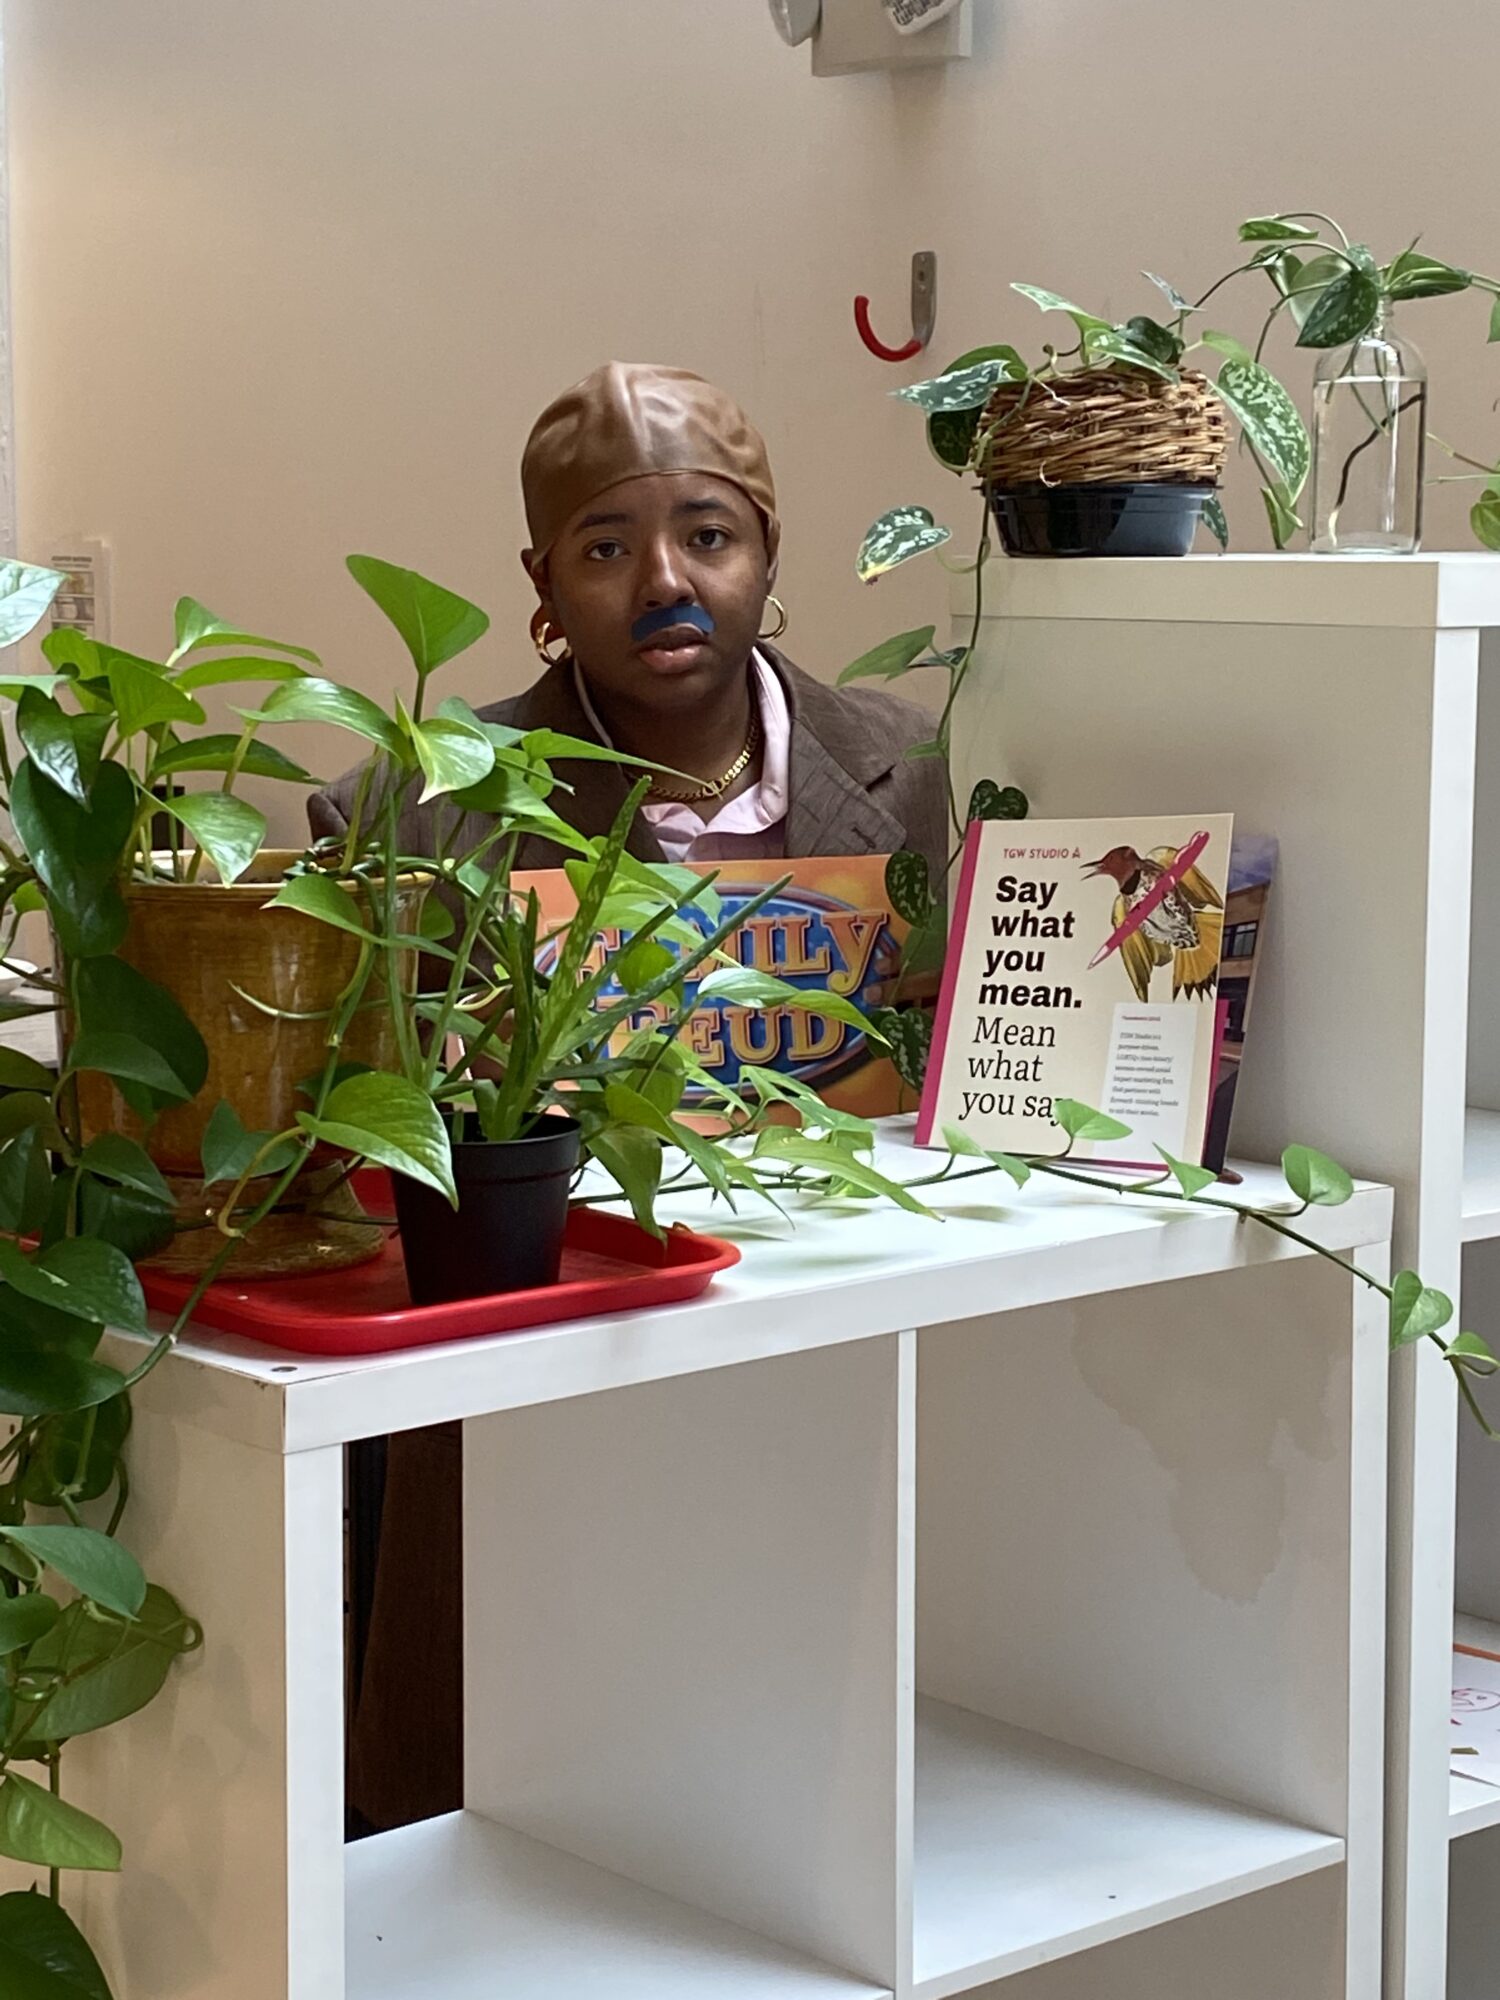 Raven as Steve Harvey hides behind house plants in the office